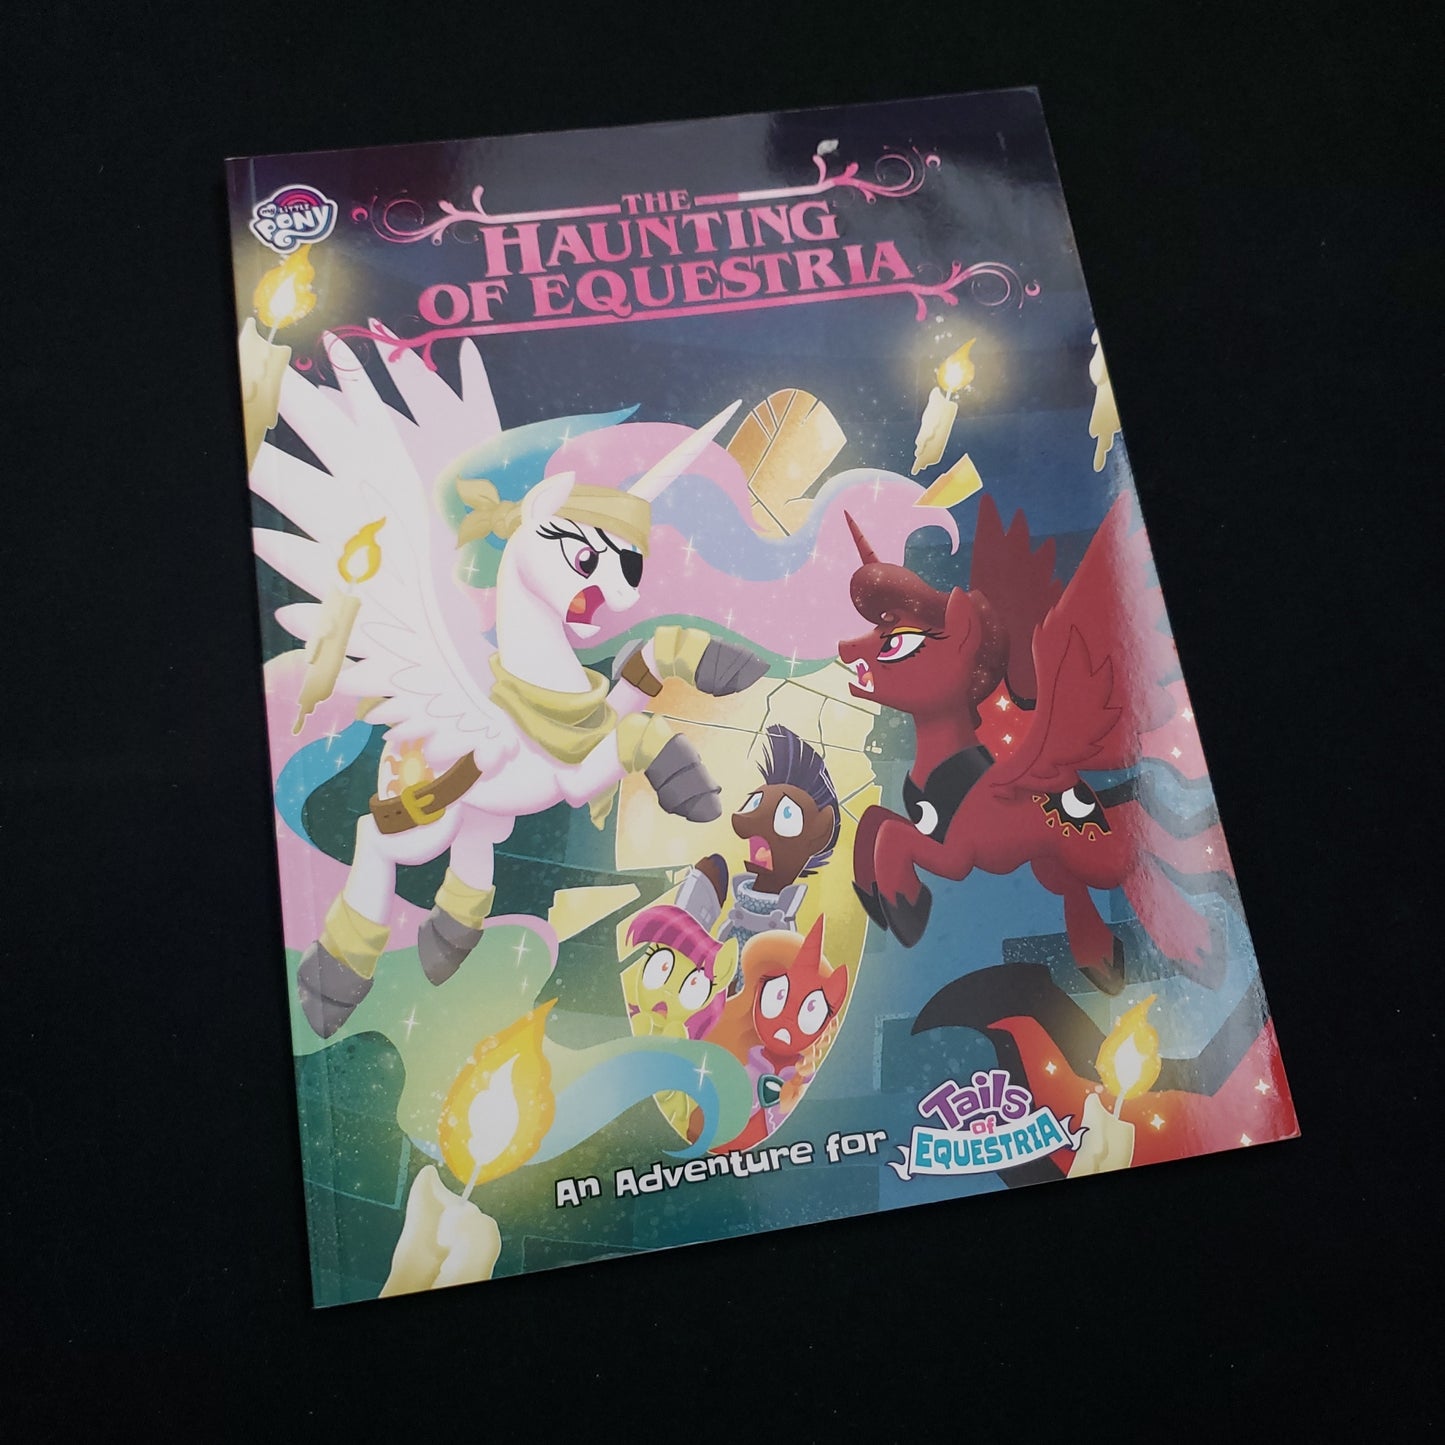 Image shows the front cover of the Haunting of Equestria book for the My Little Pony: Tales of Equestria roleplaying game